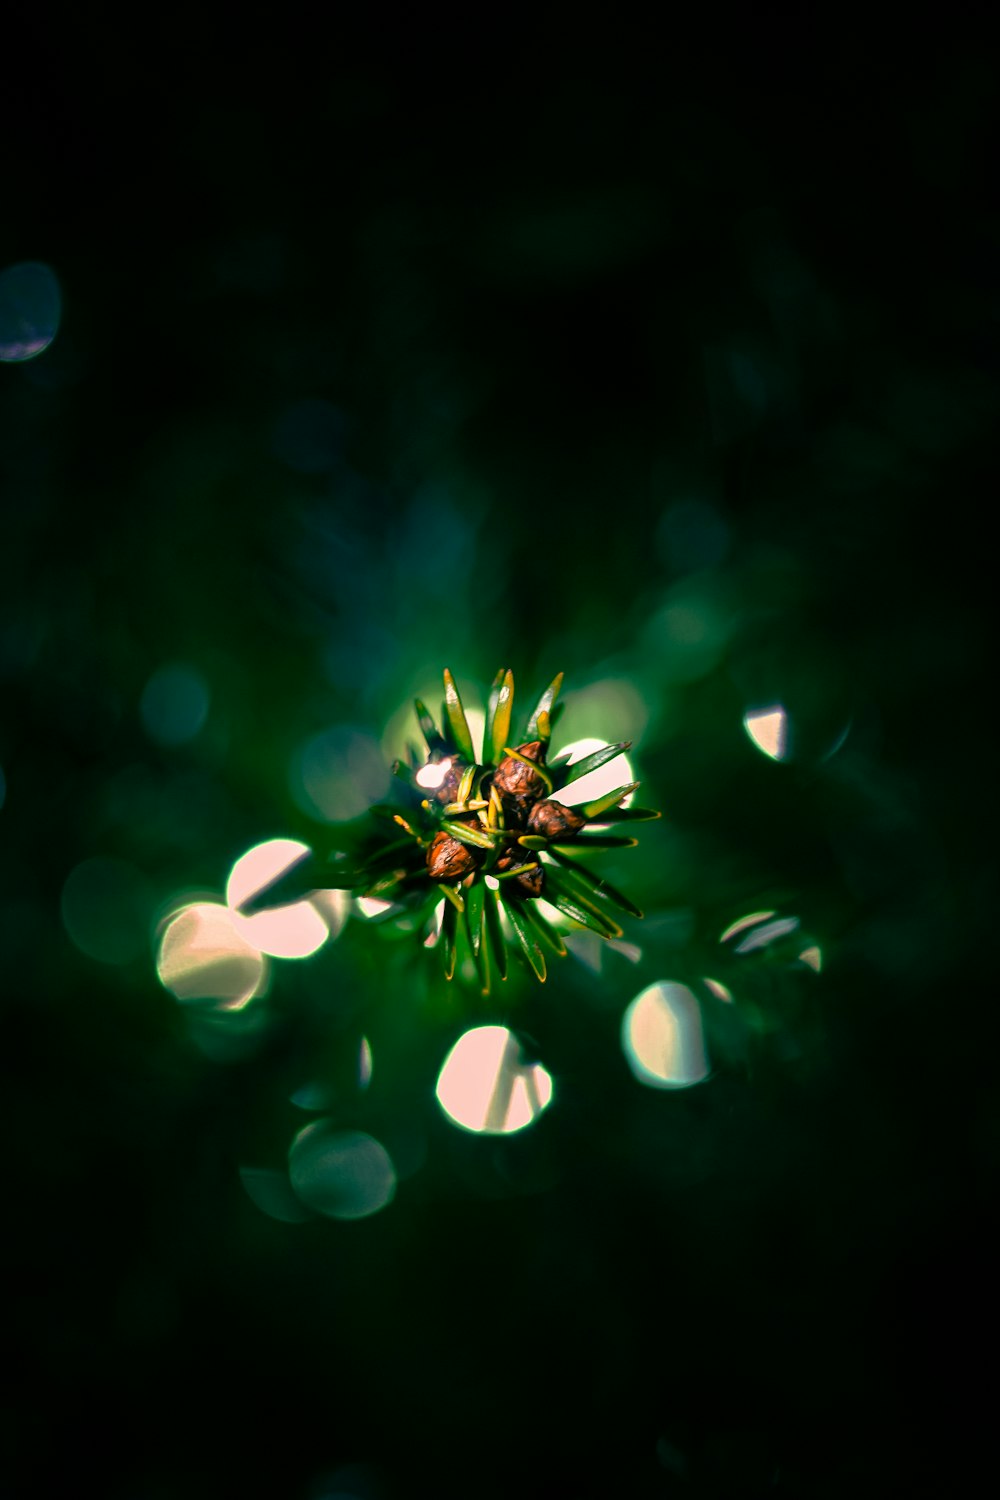 a close up of a flower on a dark background